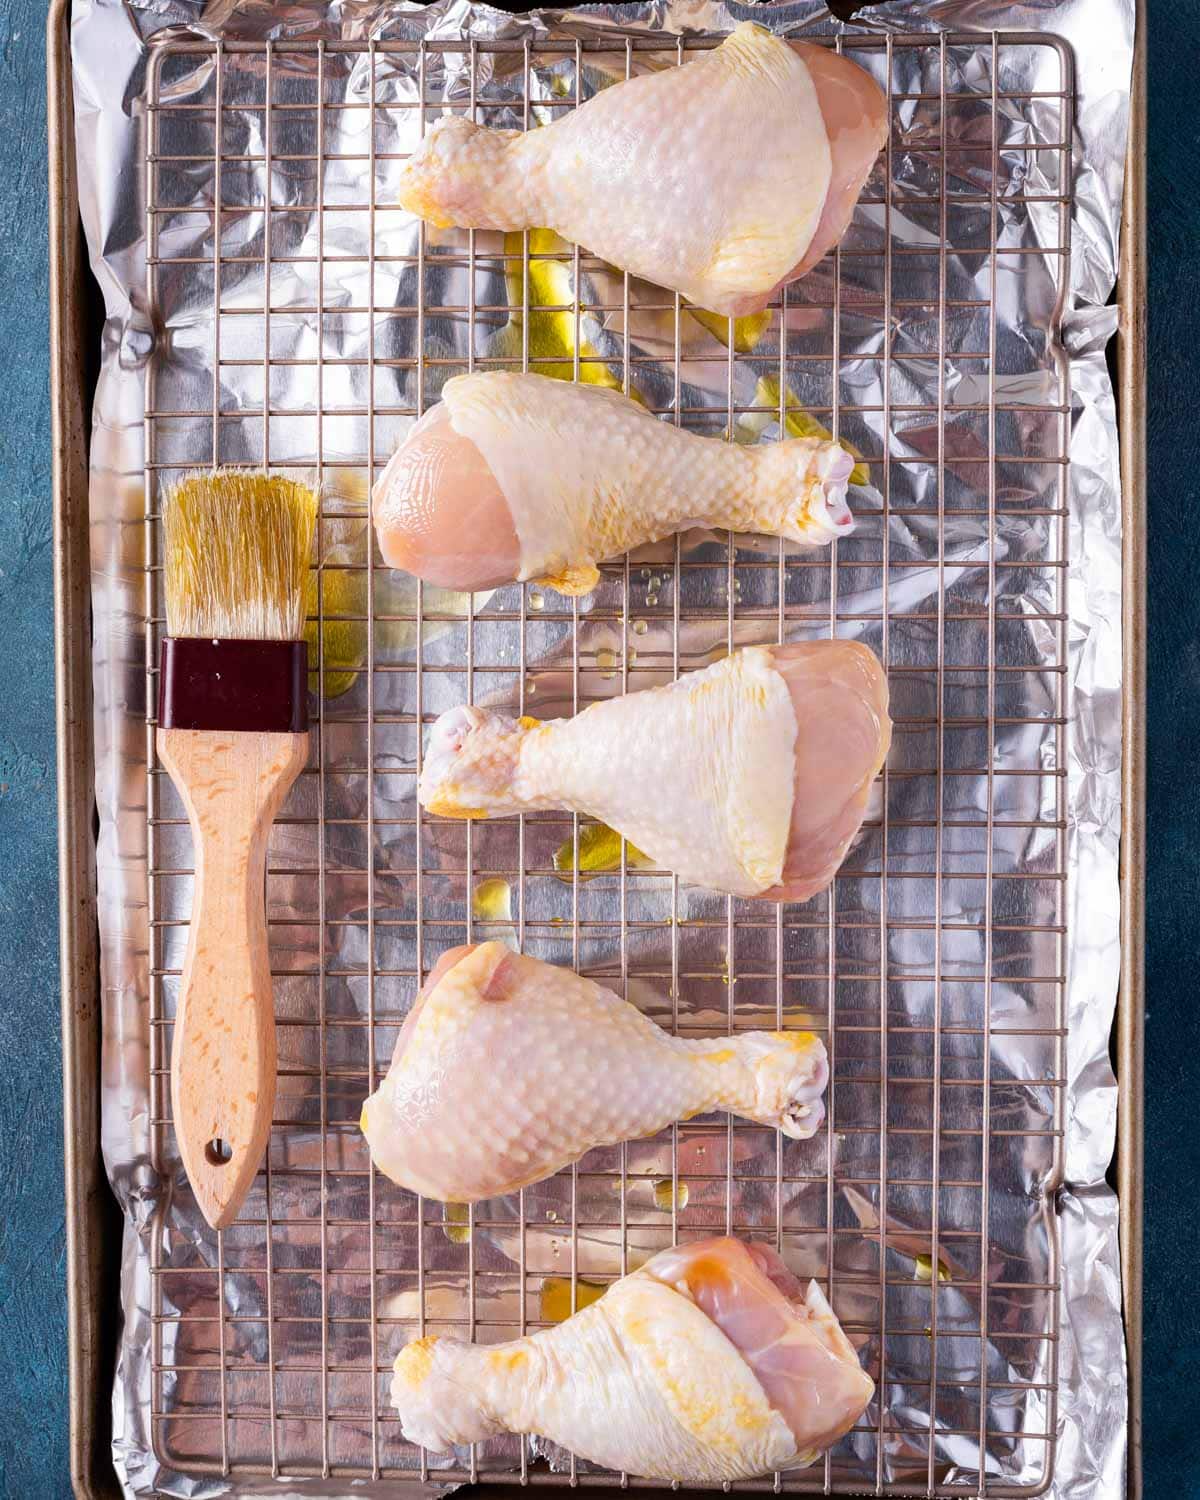 unbaked chicken legs on a wire baking rack